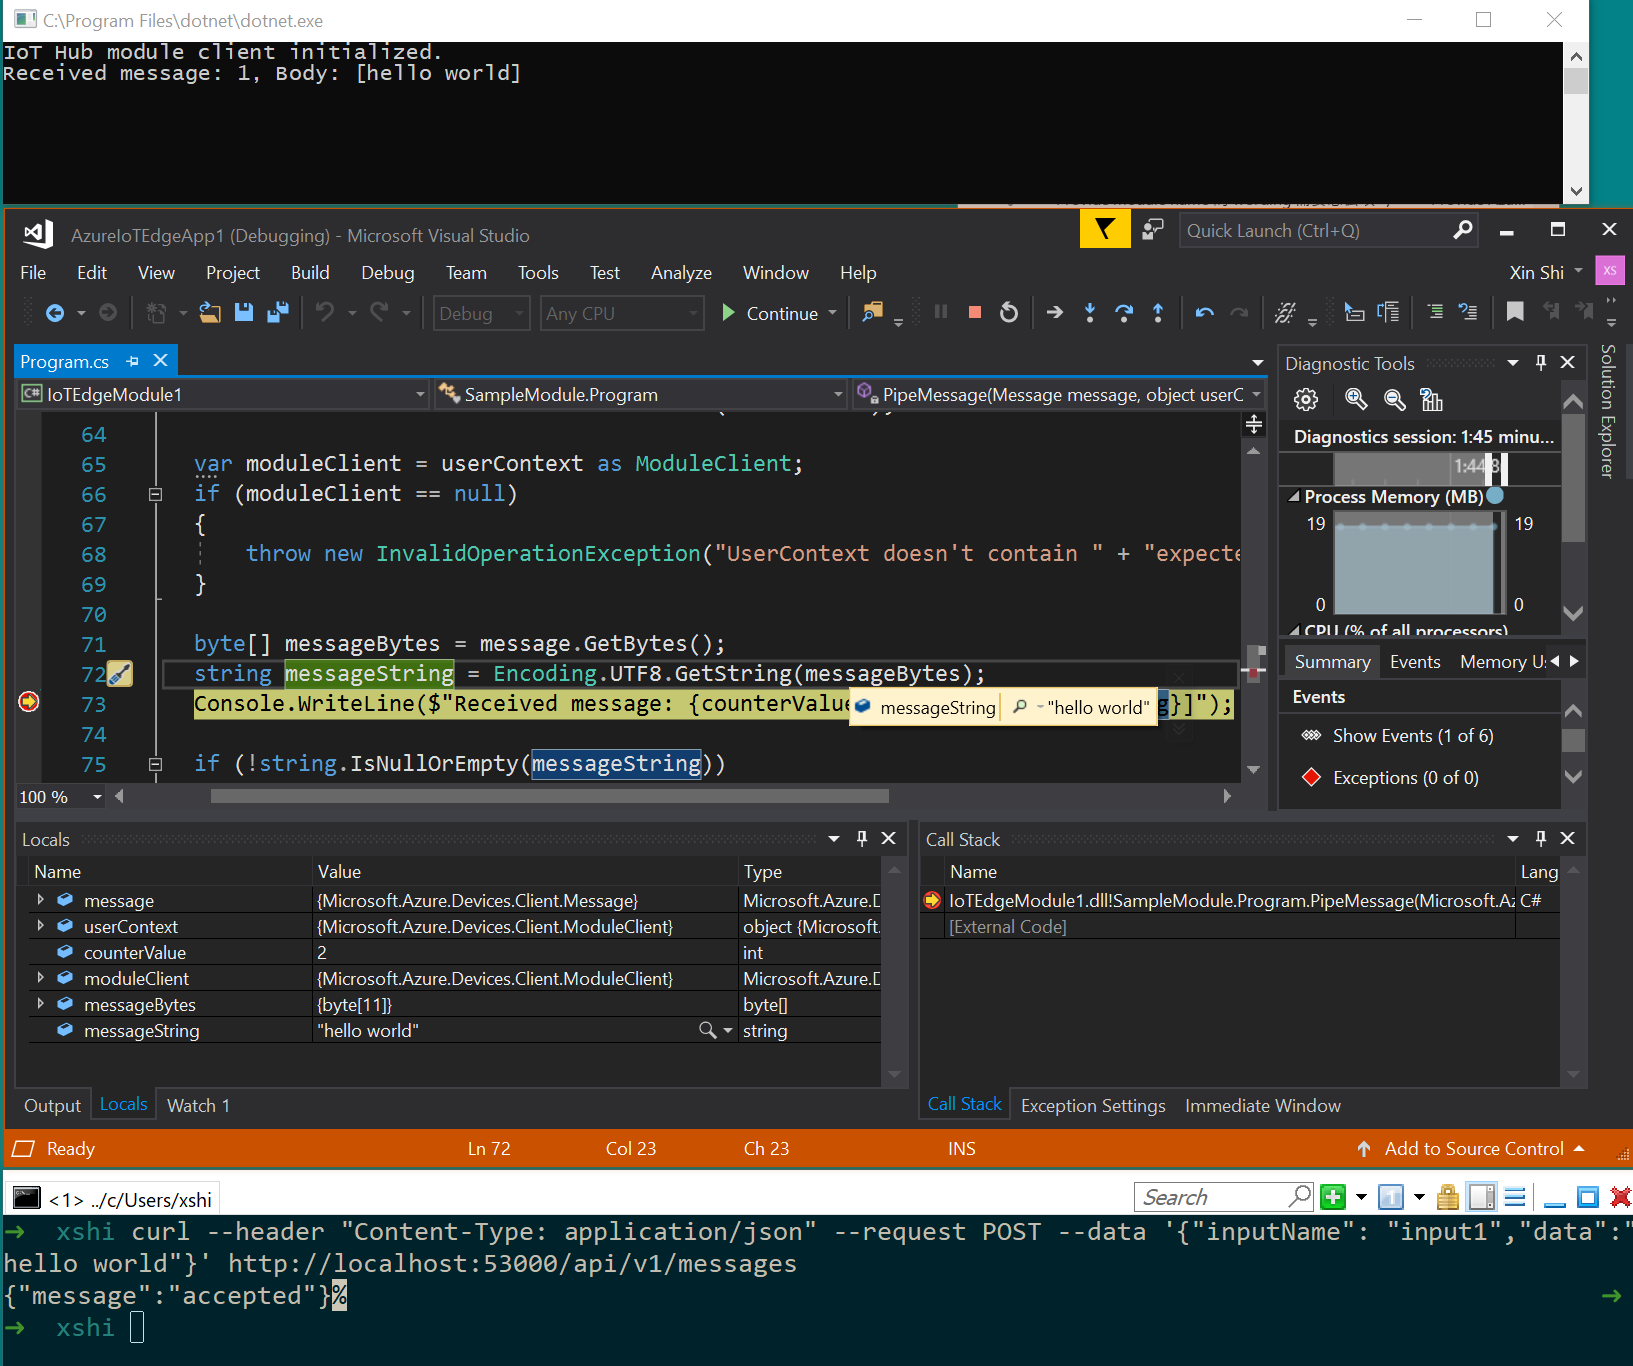 Screenshot of the output console, Visual Studio project, and Bash window.